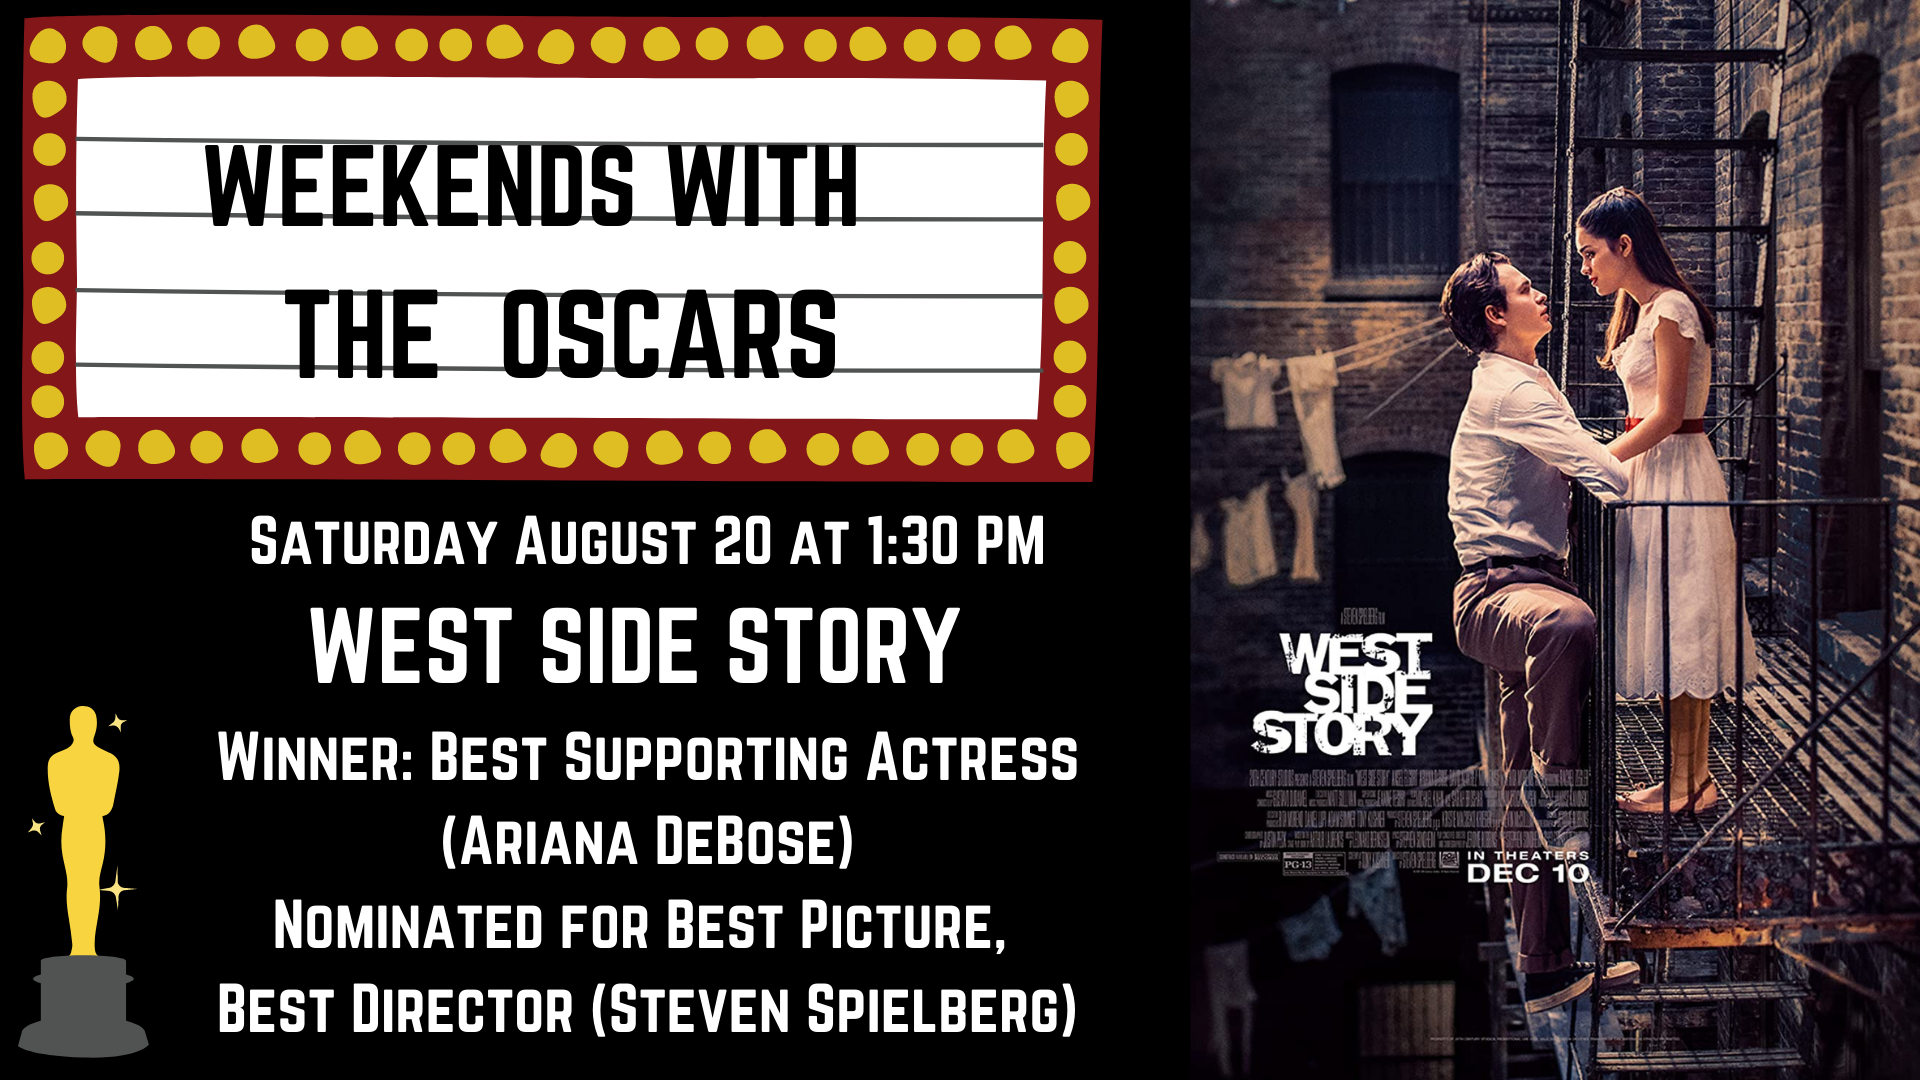 Banner advertising our screening of WEST SIDE STORY on August 20 at 1:30 PM, featuring the movie poster.